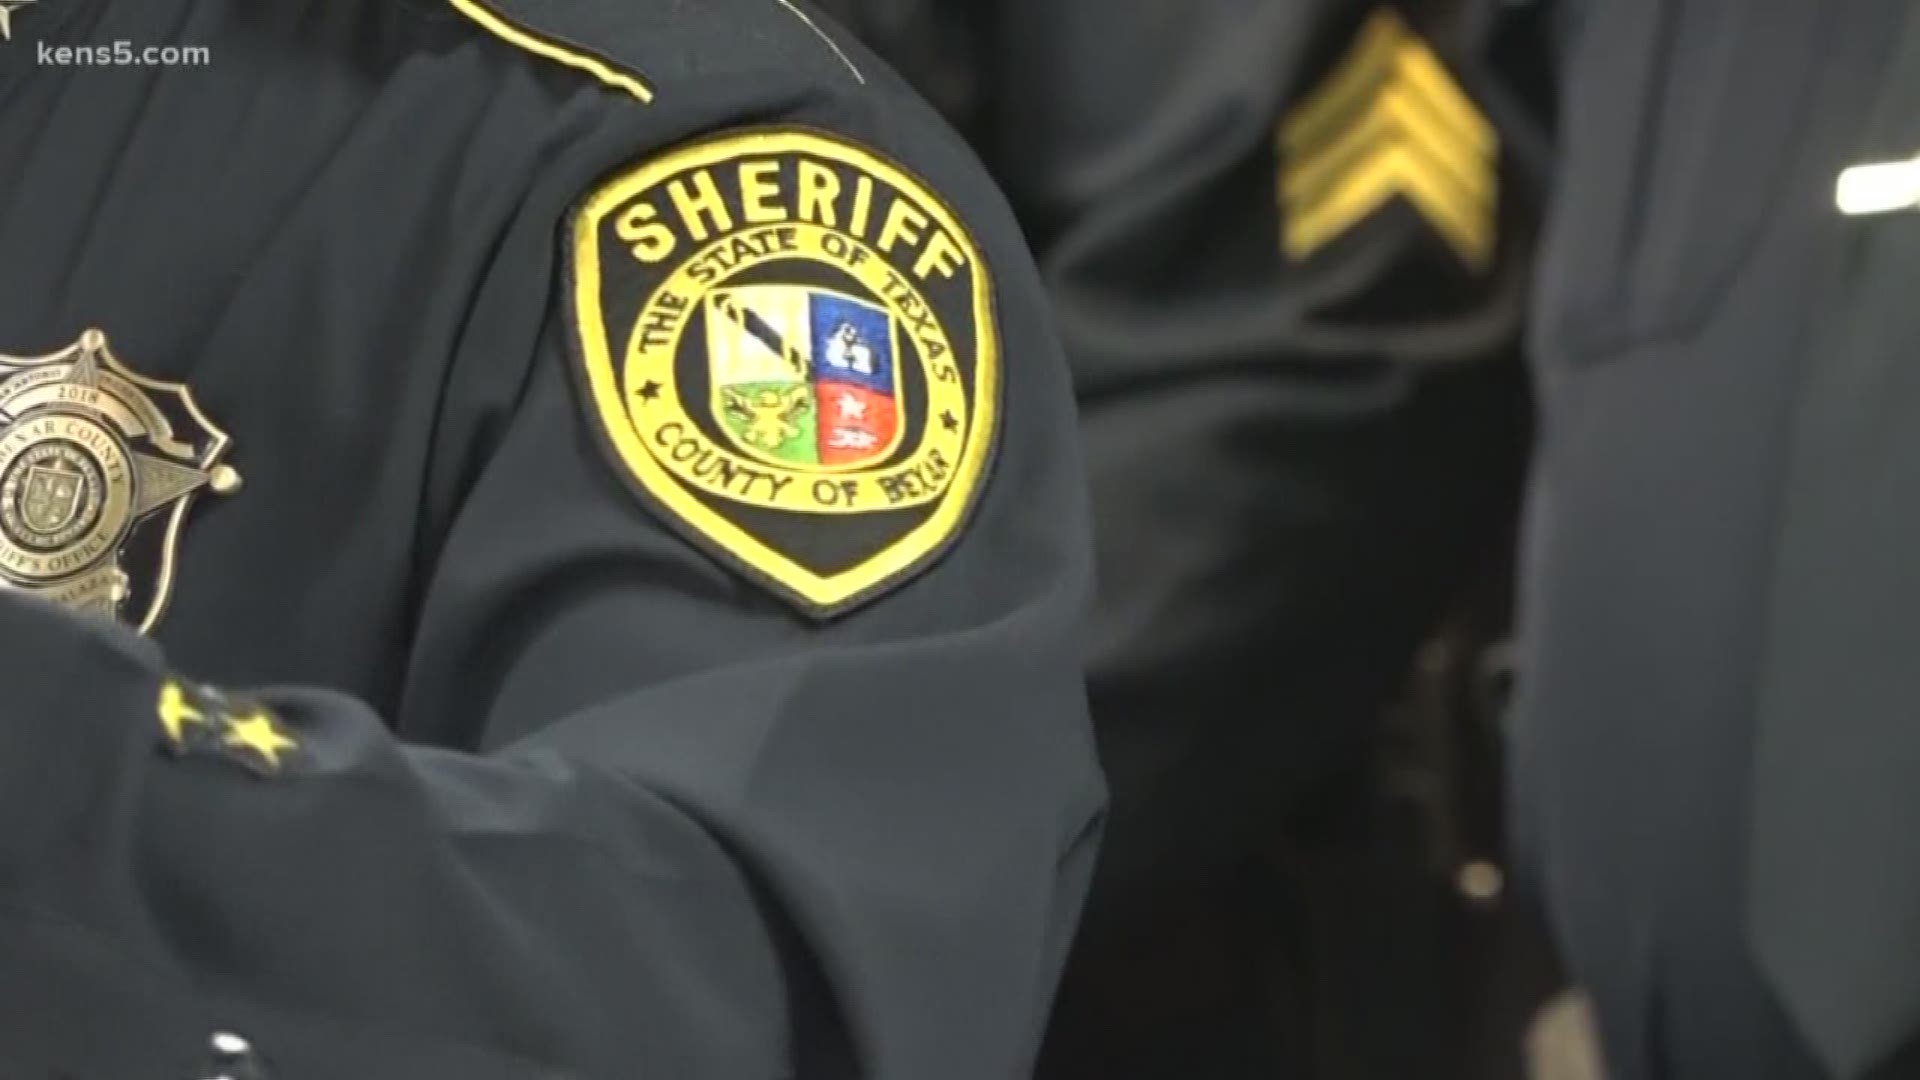 A new program will place deputies with the Bexar County Sheriff's Office into schools to improve safety.